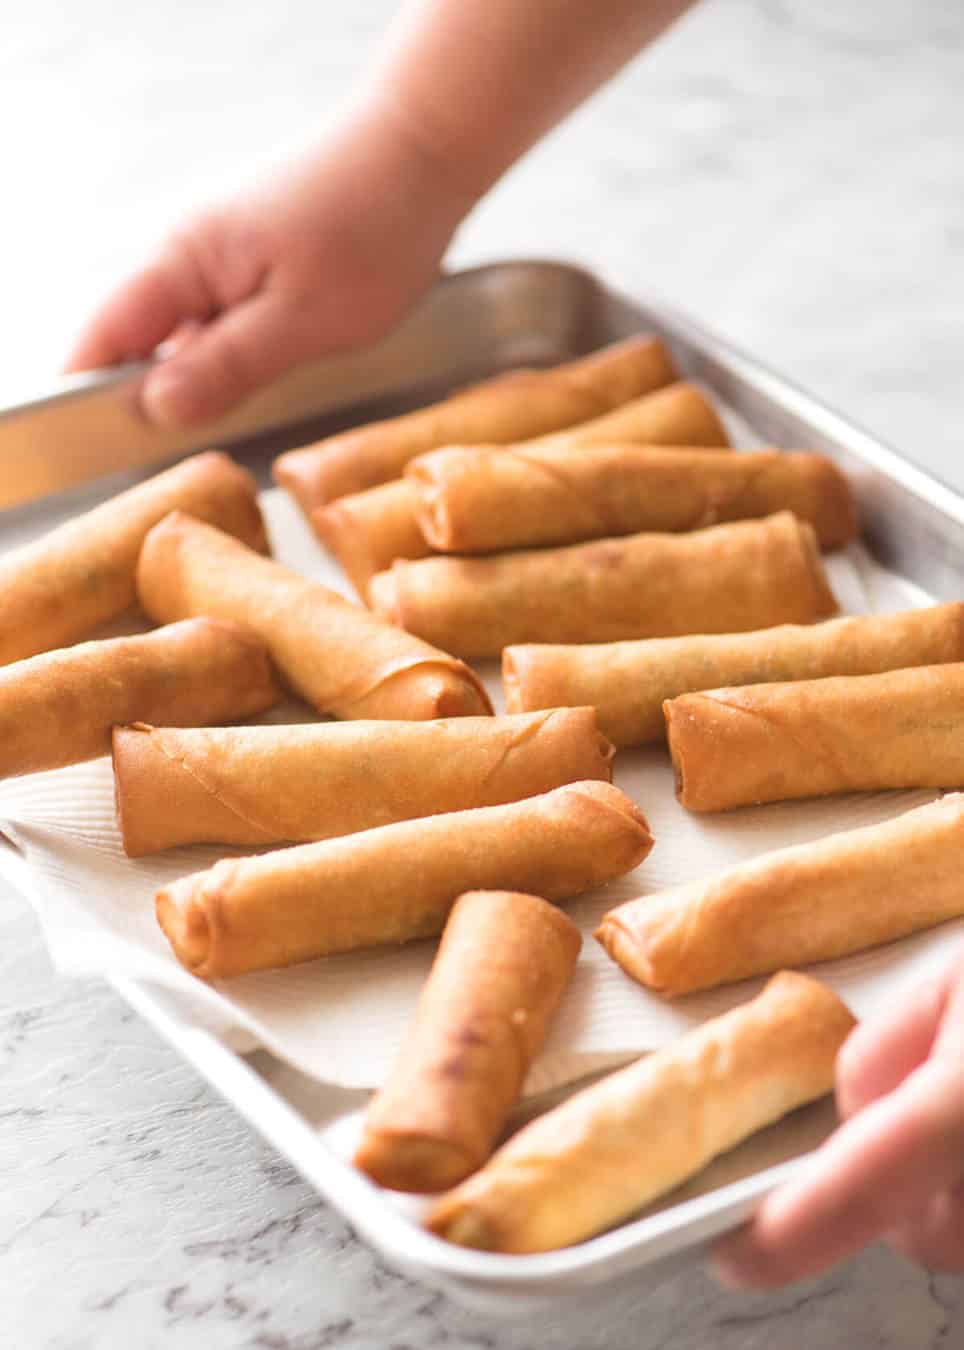 You've never really had a Spring Roll until you've tried homemade ones. With the quick video tutorial, you'll master it in no time! www.recipetineats.com